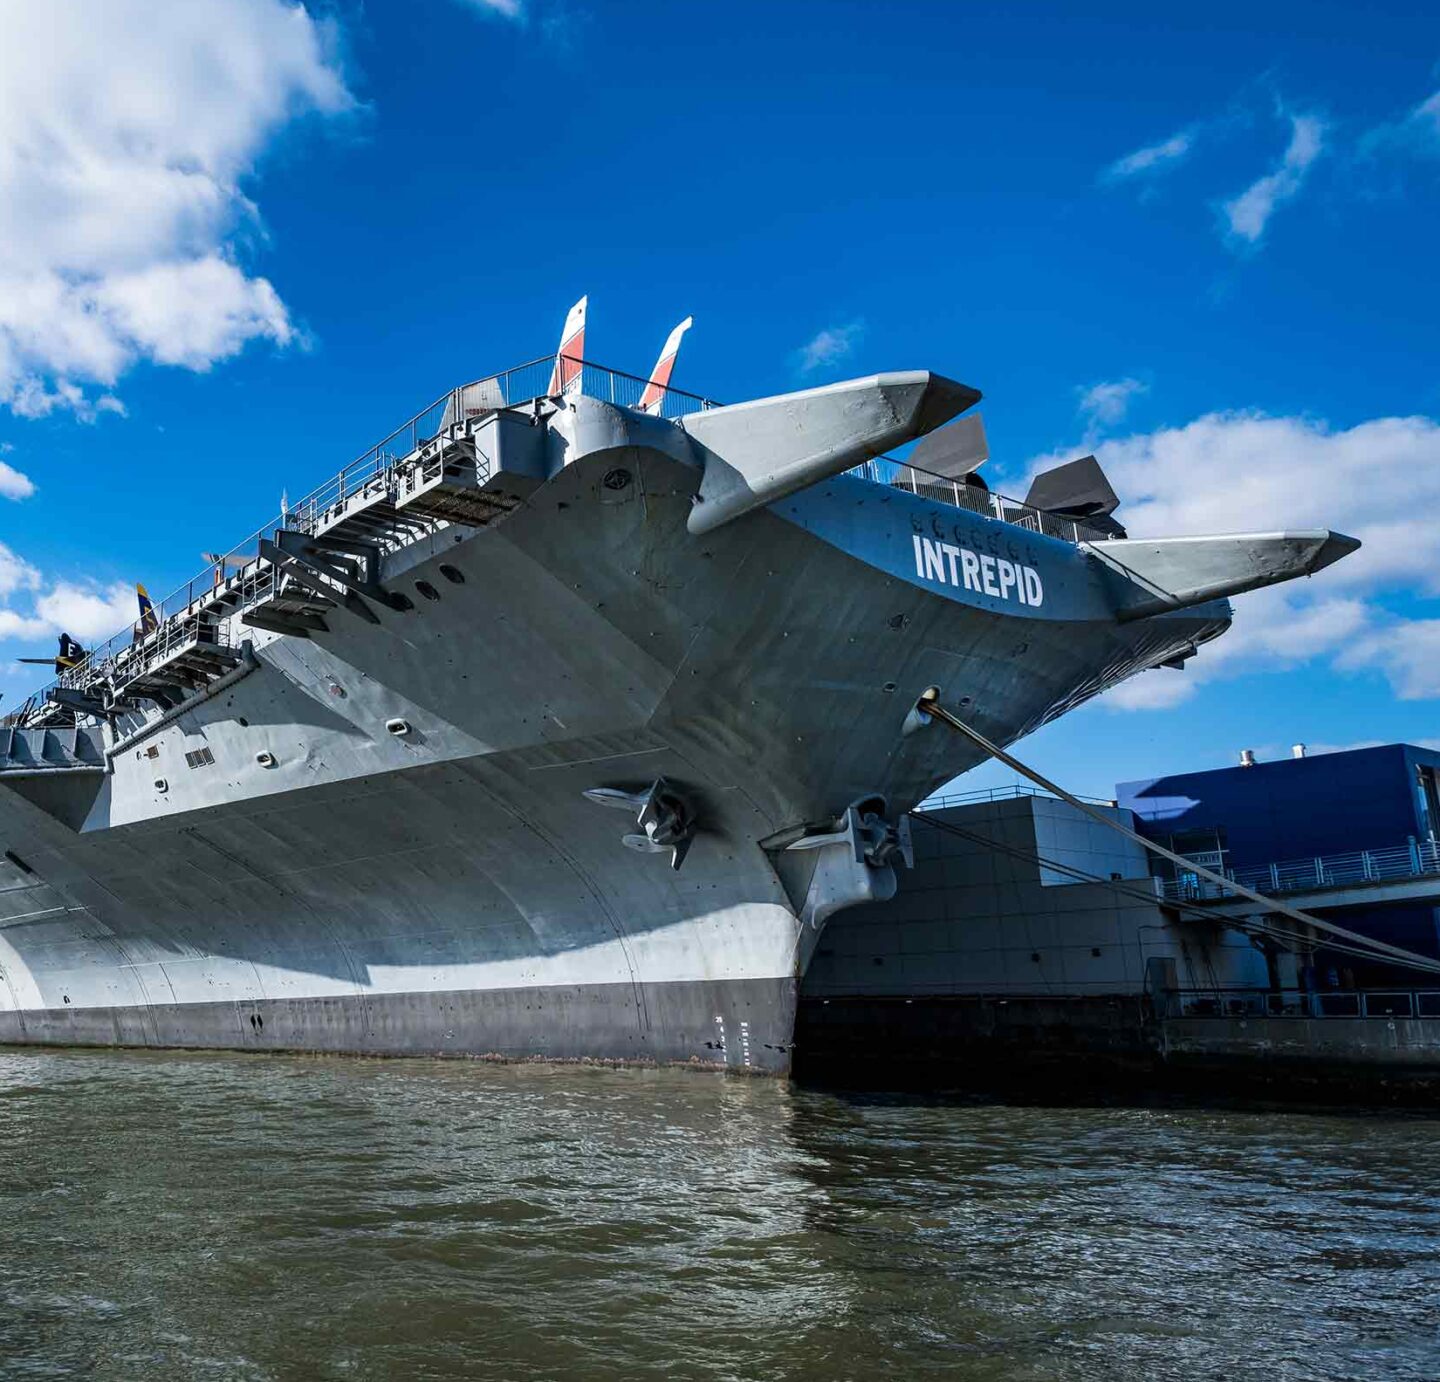 The Intrepid sits on the Hudson River for passersby to enjoy at Hudson River Park's Pier 86